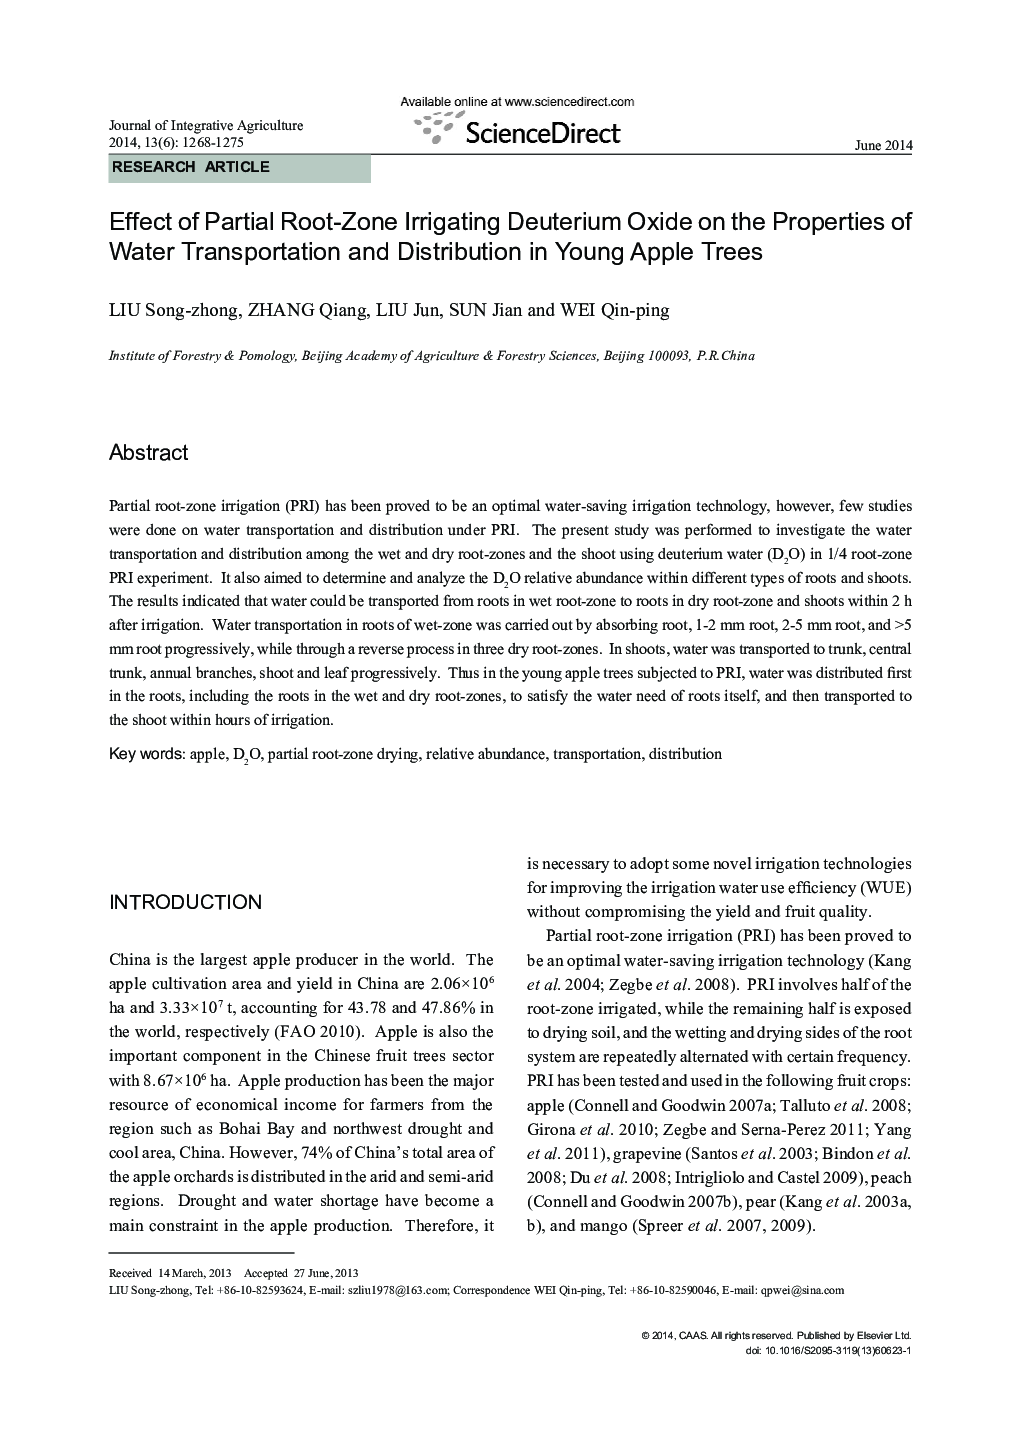 Effect of Partial Root-Zone Irrigating Deuterium Oxide on the Properties of Water Transportation and Distribution in Young Apple Trees